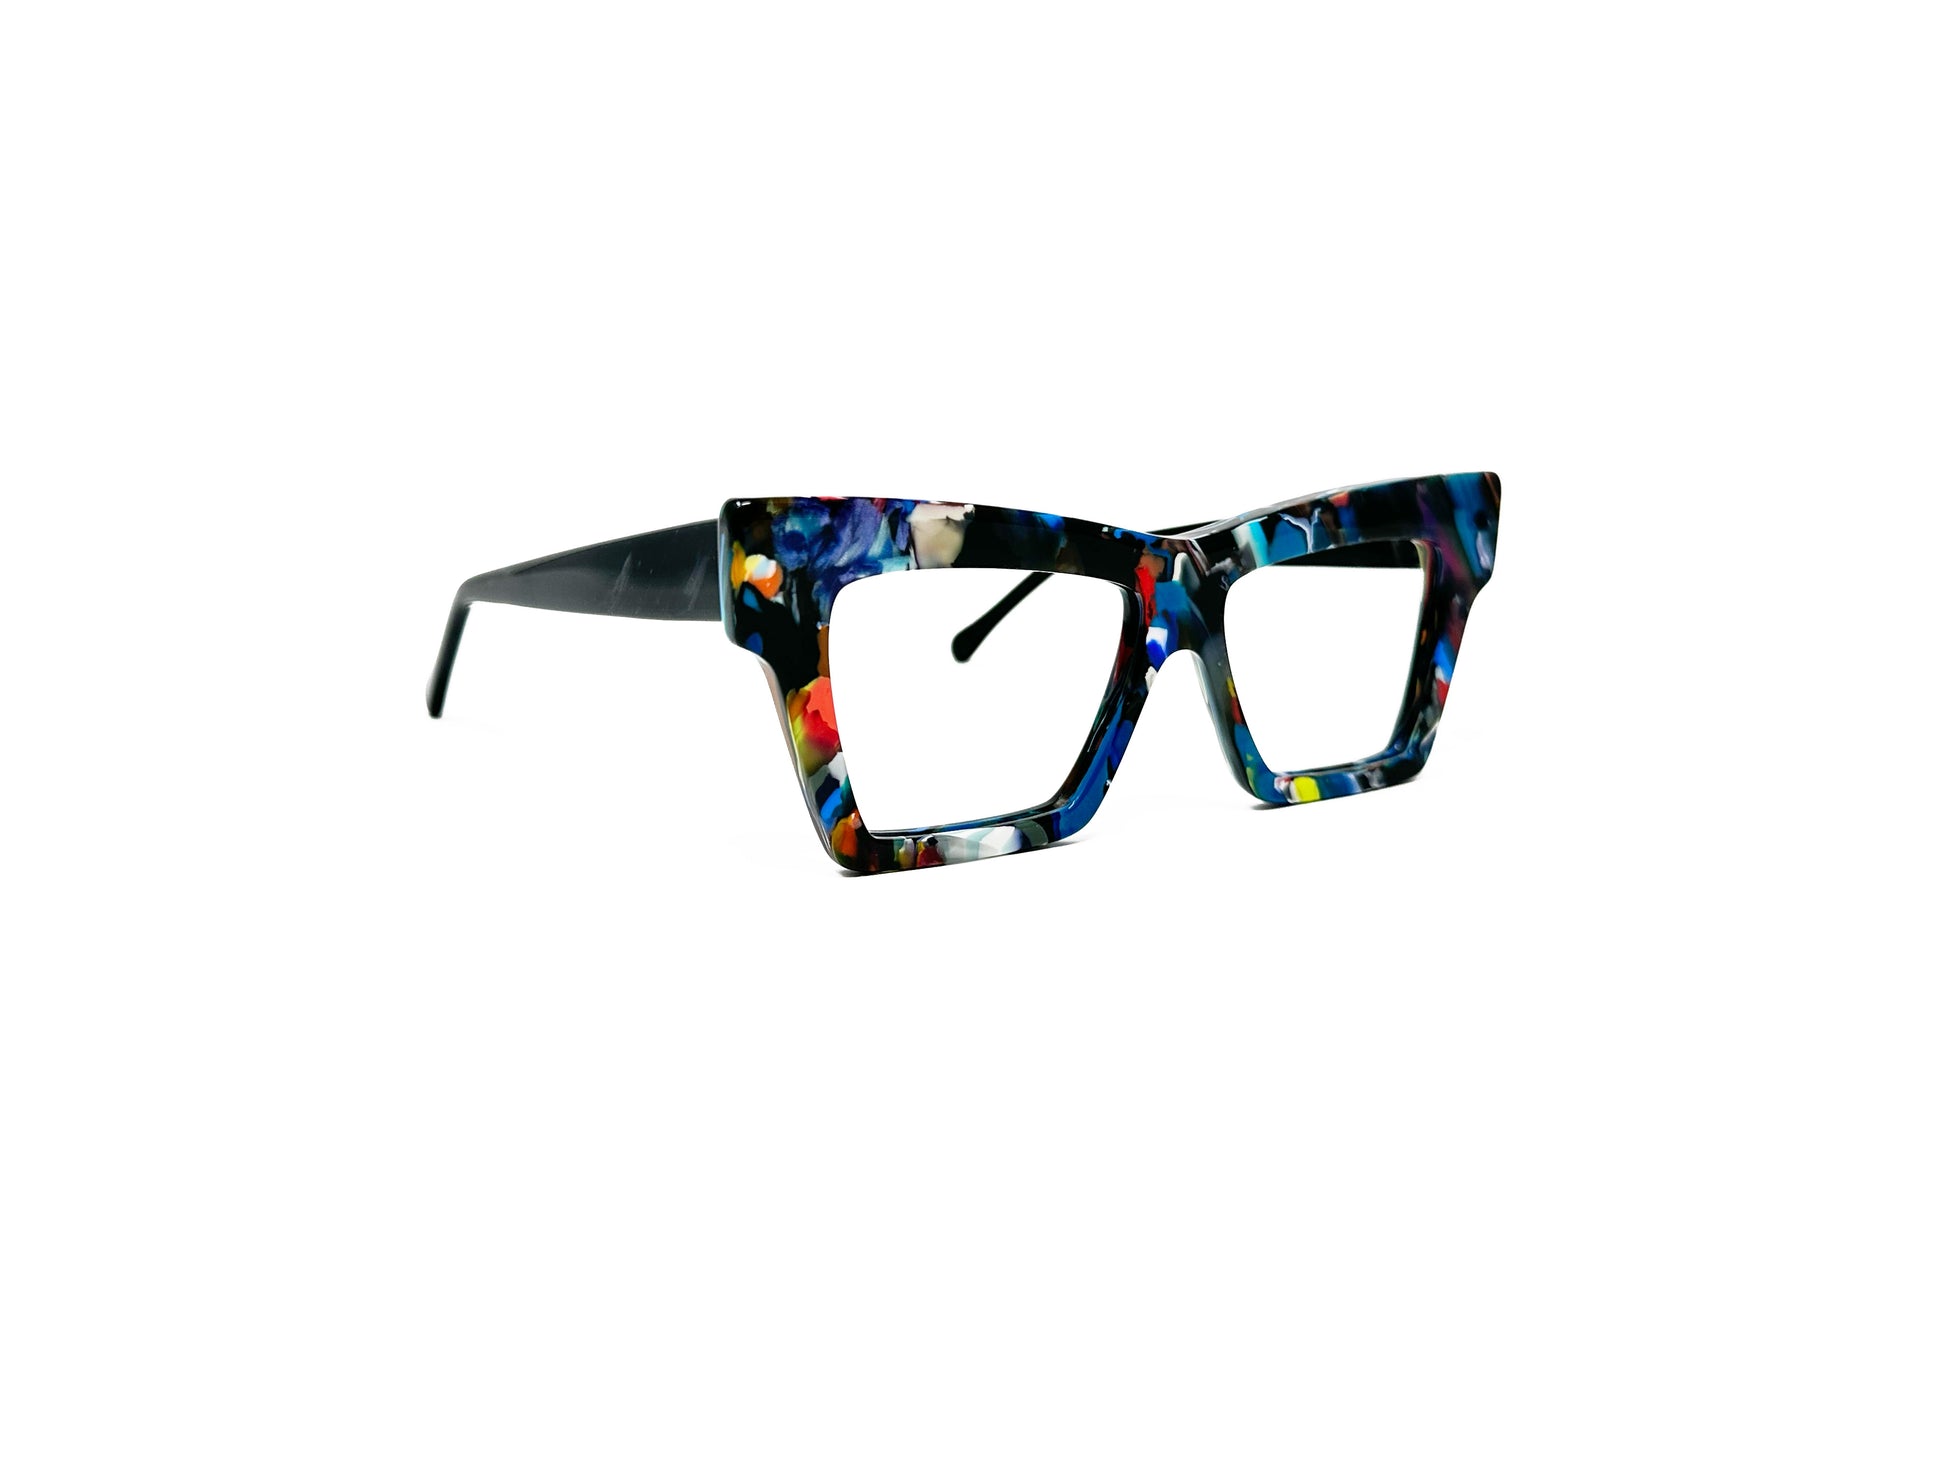 Viktlos recycled acetate optical frame. Upward angled rectangular frame. Model: RC007. Color: 02592, Multi-colored blue marble pattern. Side view.